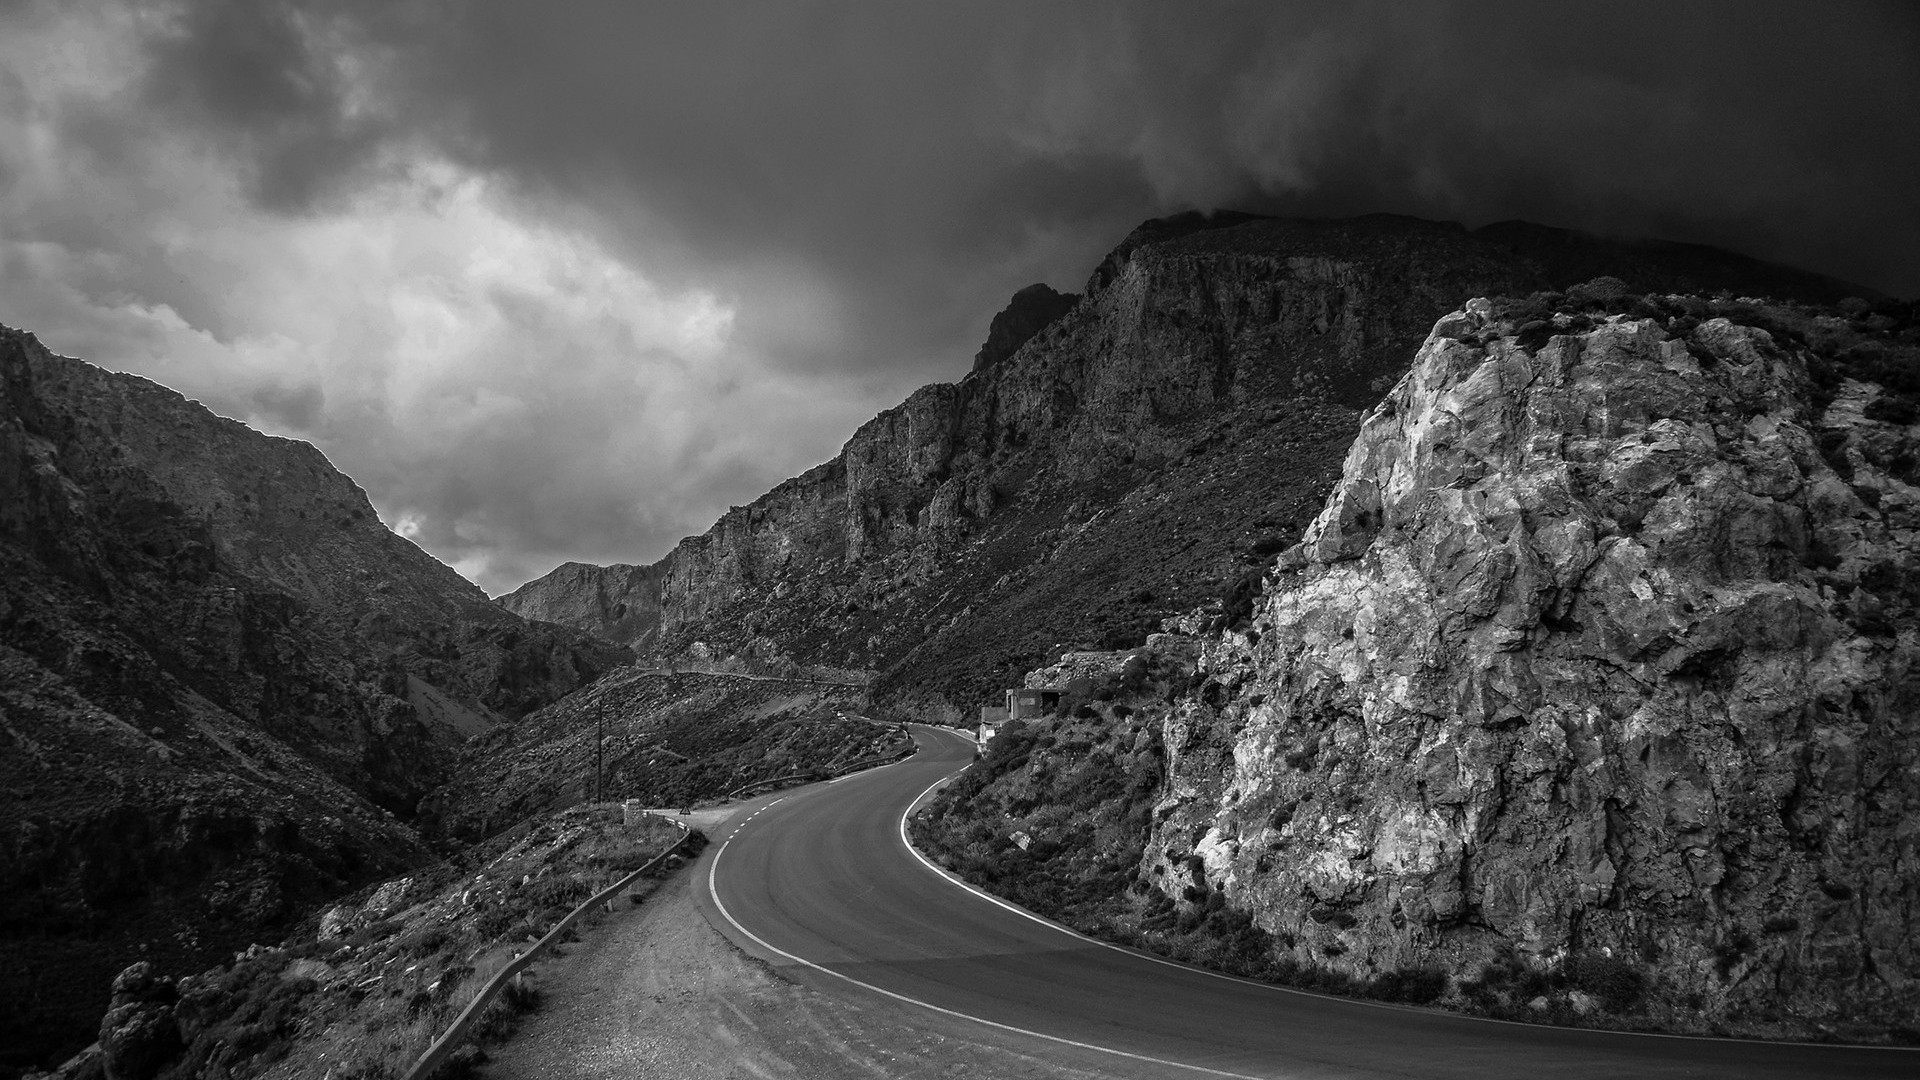 1920x1080 wallpapers: road, mountains, serpentine, black and white (bw) (image)